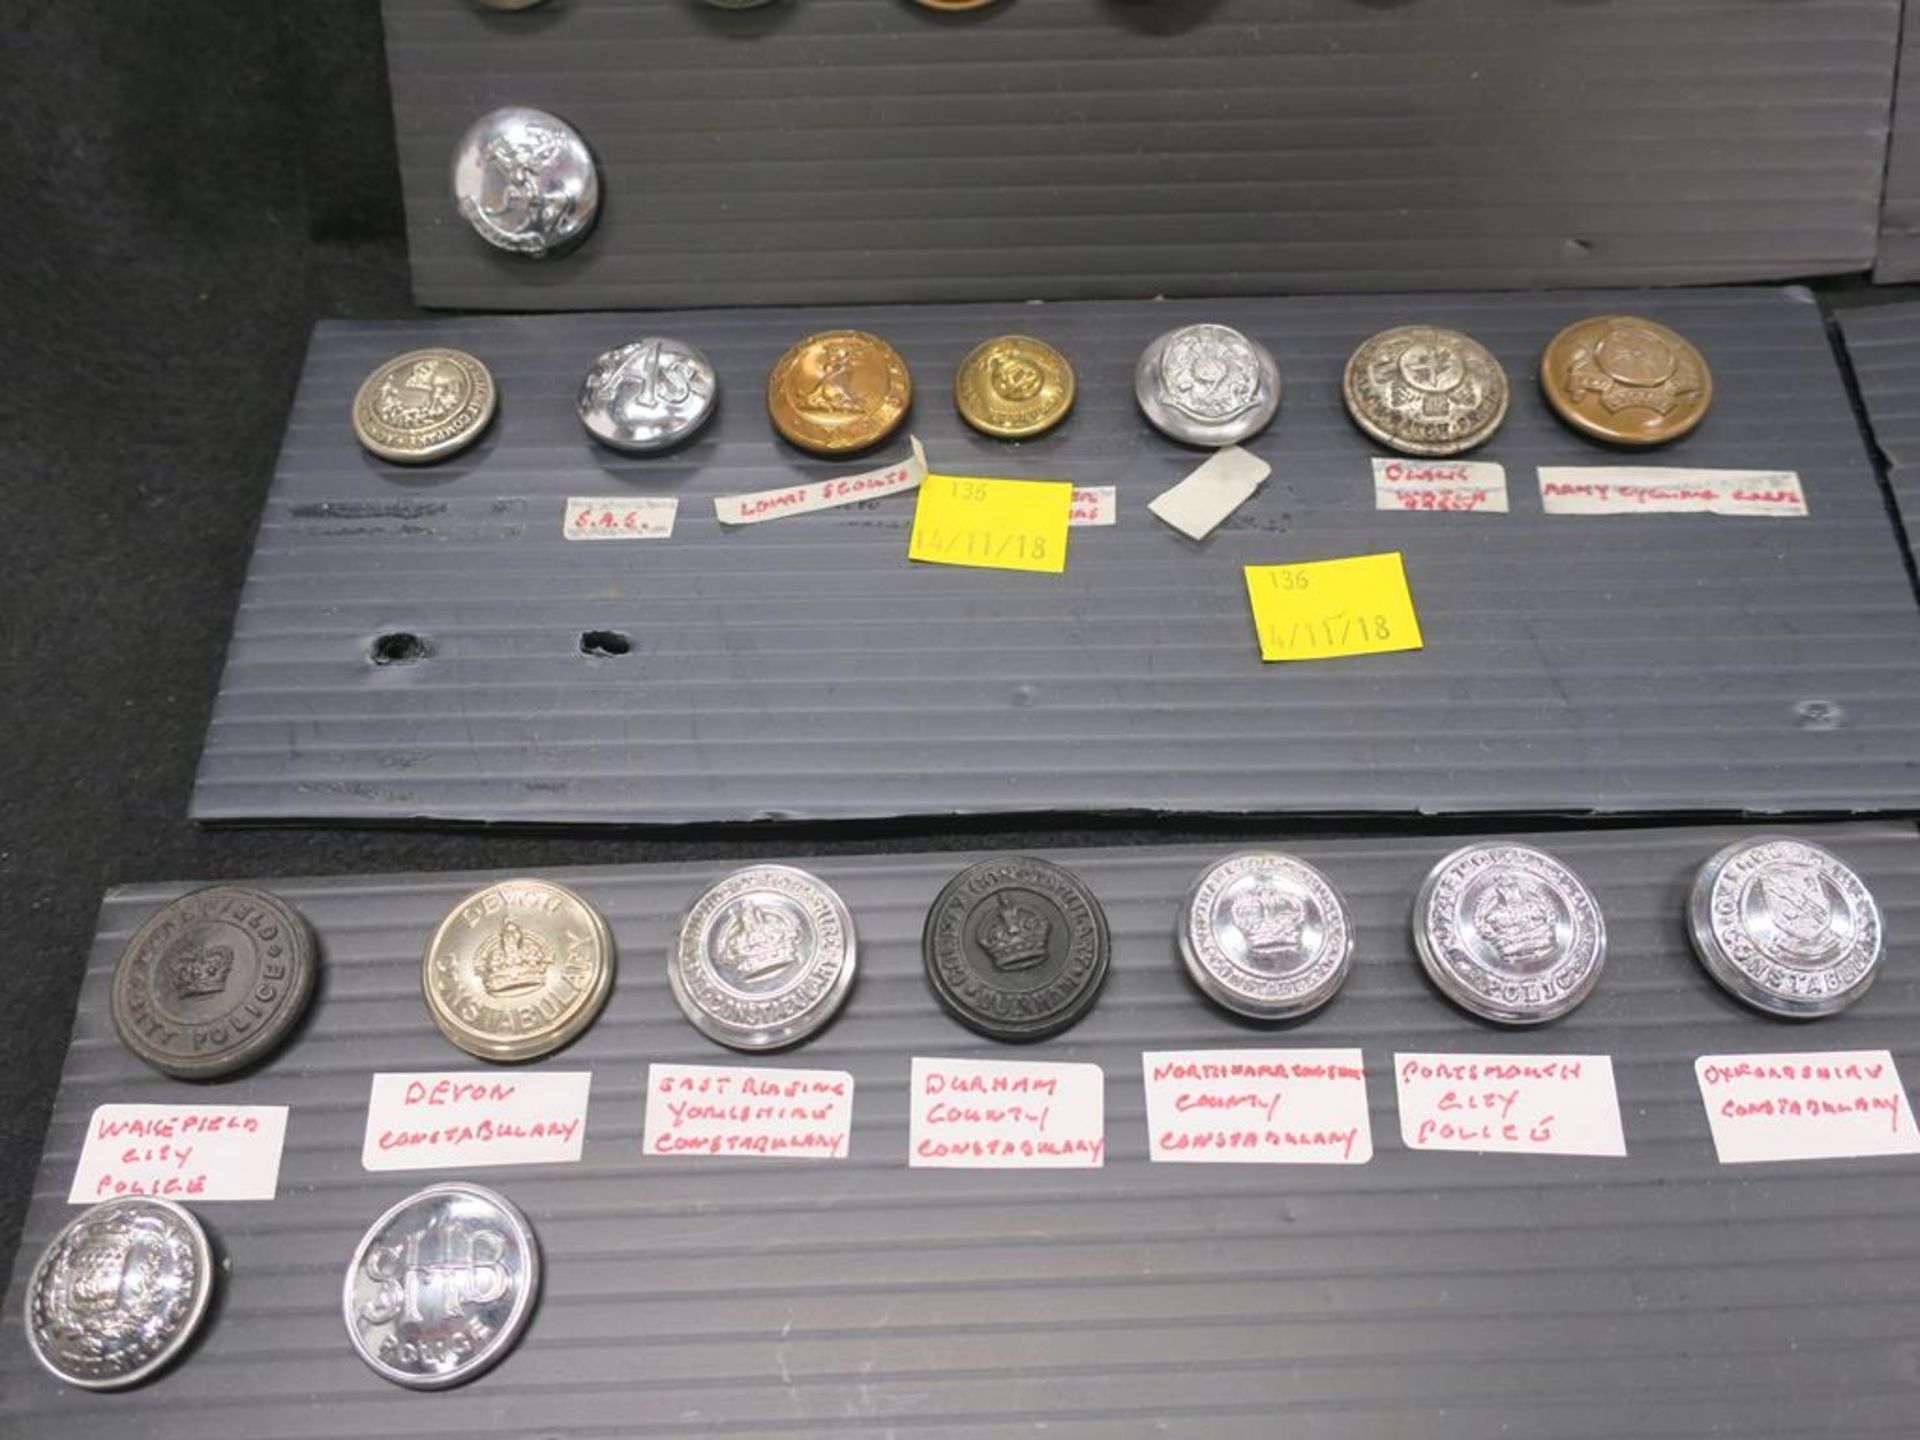 A Box containing Military Badges and Buttons with some Commercial Buttons, Fire Service, Police, - Image 5 of 11